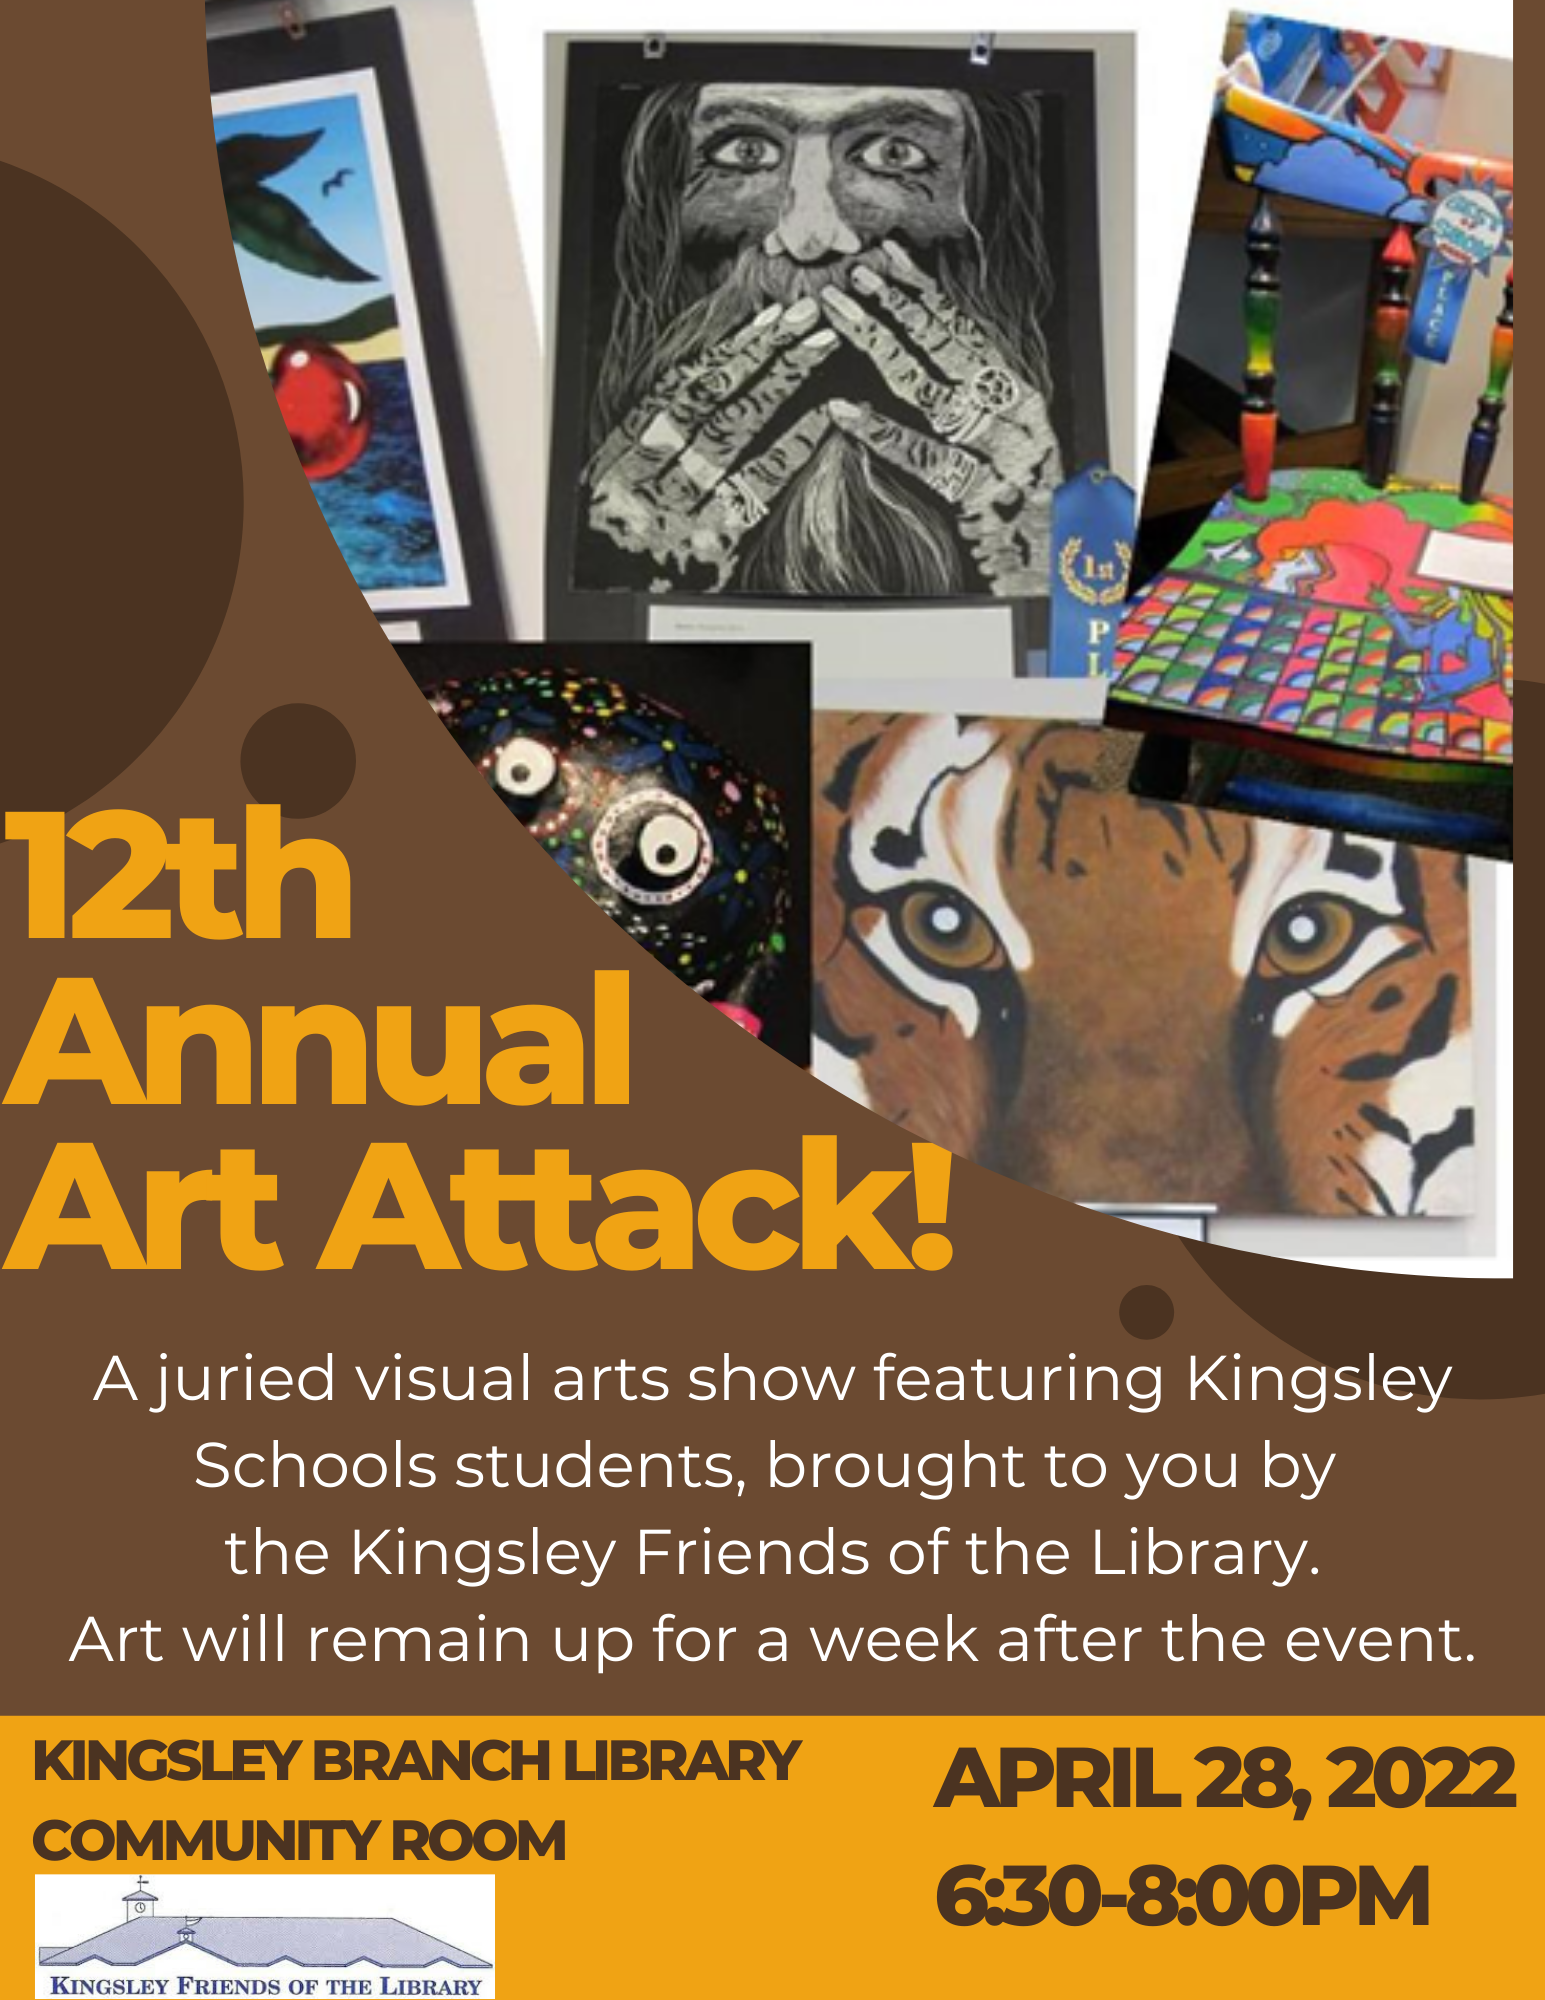 Image of flyer that includes student art work and text that reads "12th Annual Art Attack!"